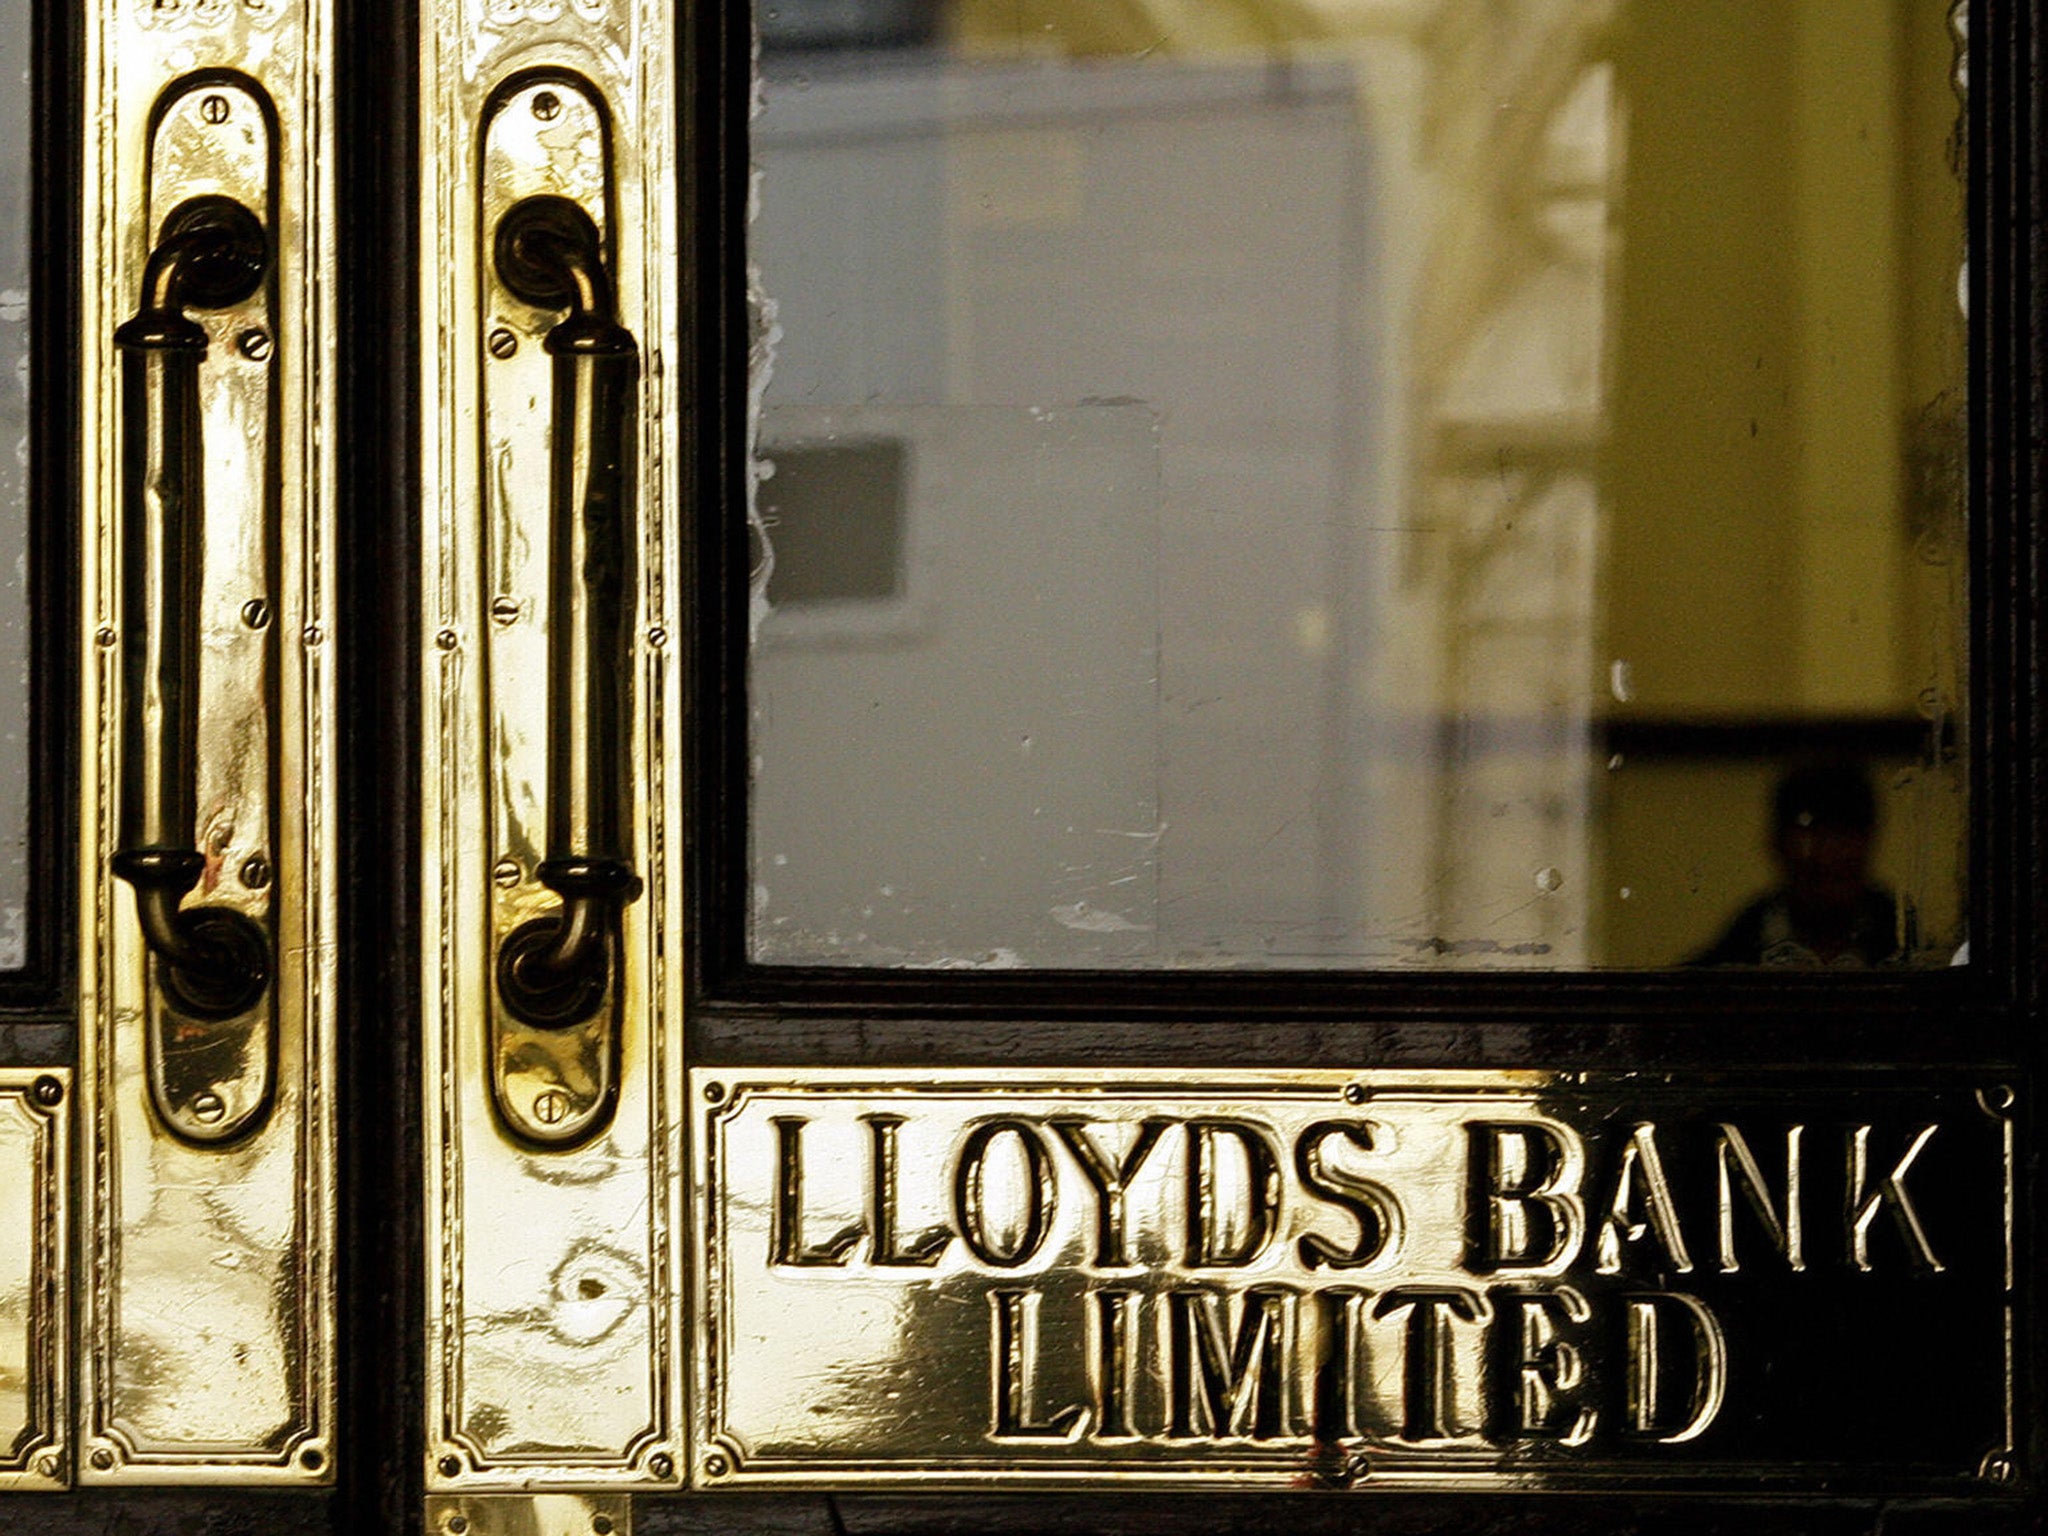 Lloyds Banking Group has reported a 7% fall in annual pre-tax profits to £1.6 bn compared with £1.8 bn a year earlier